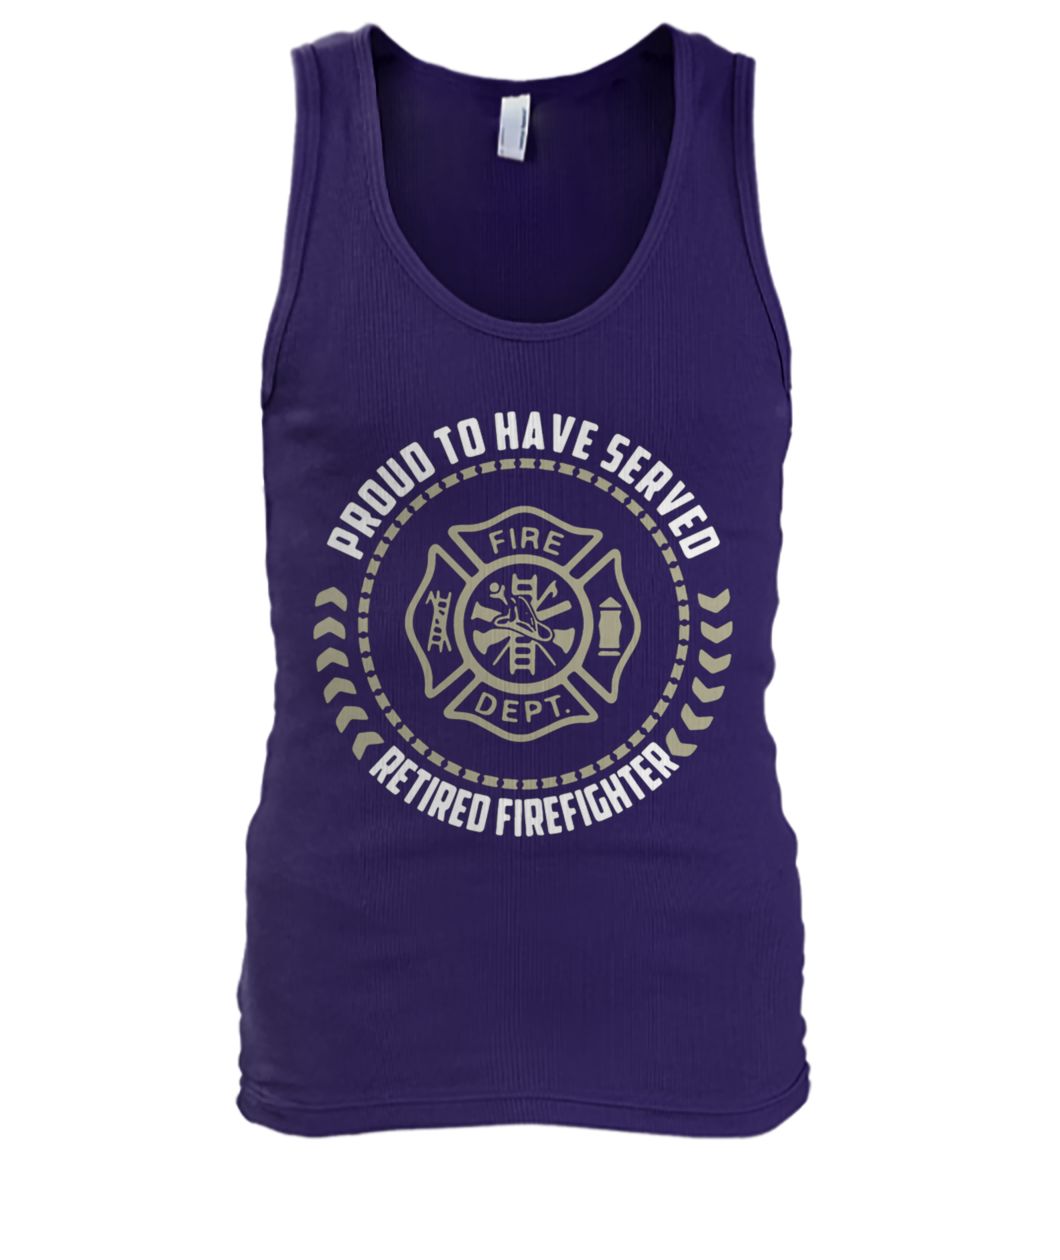 Proud to have served retired firefighter men's tank top